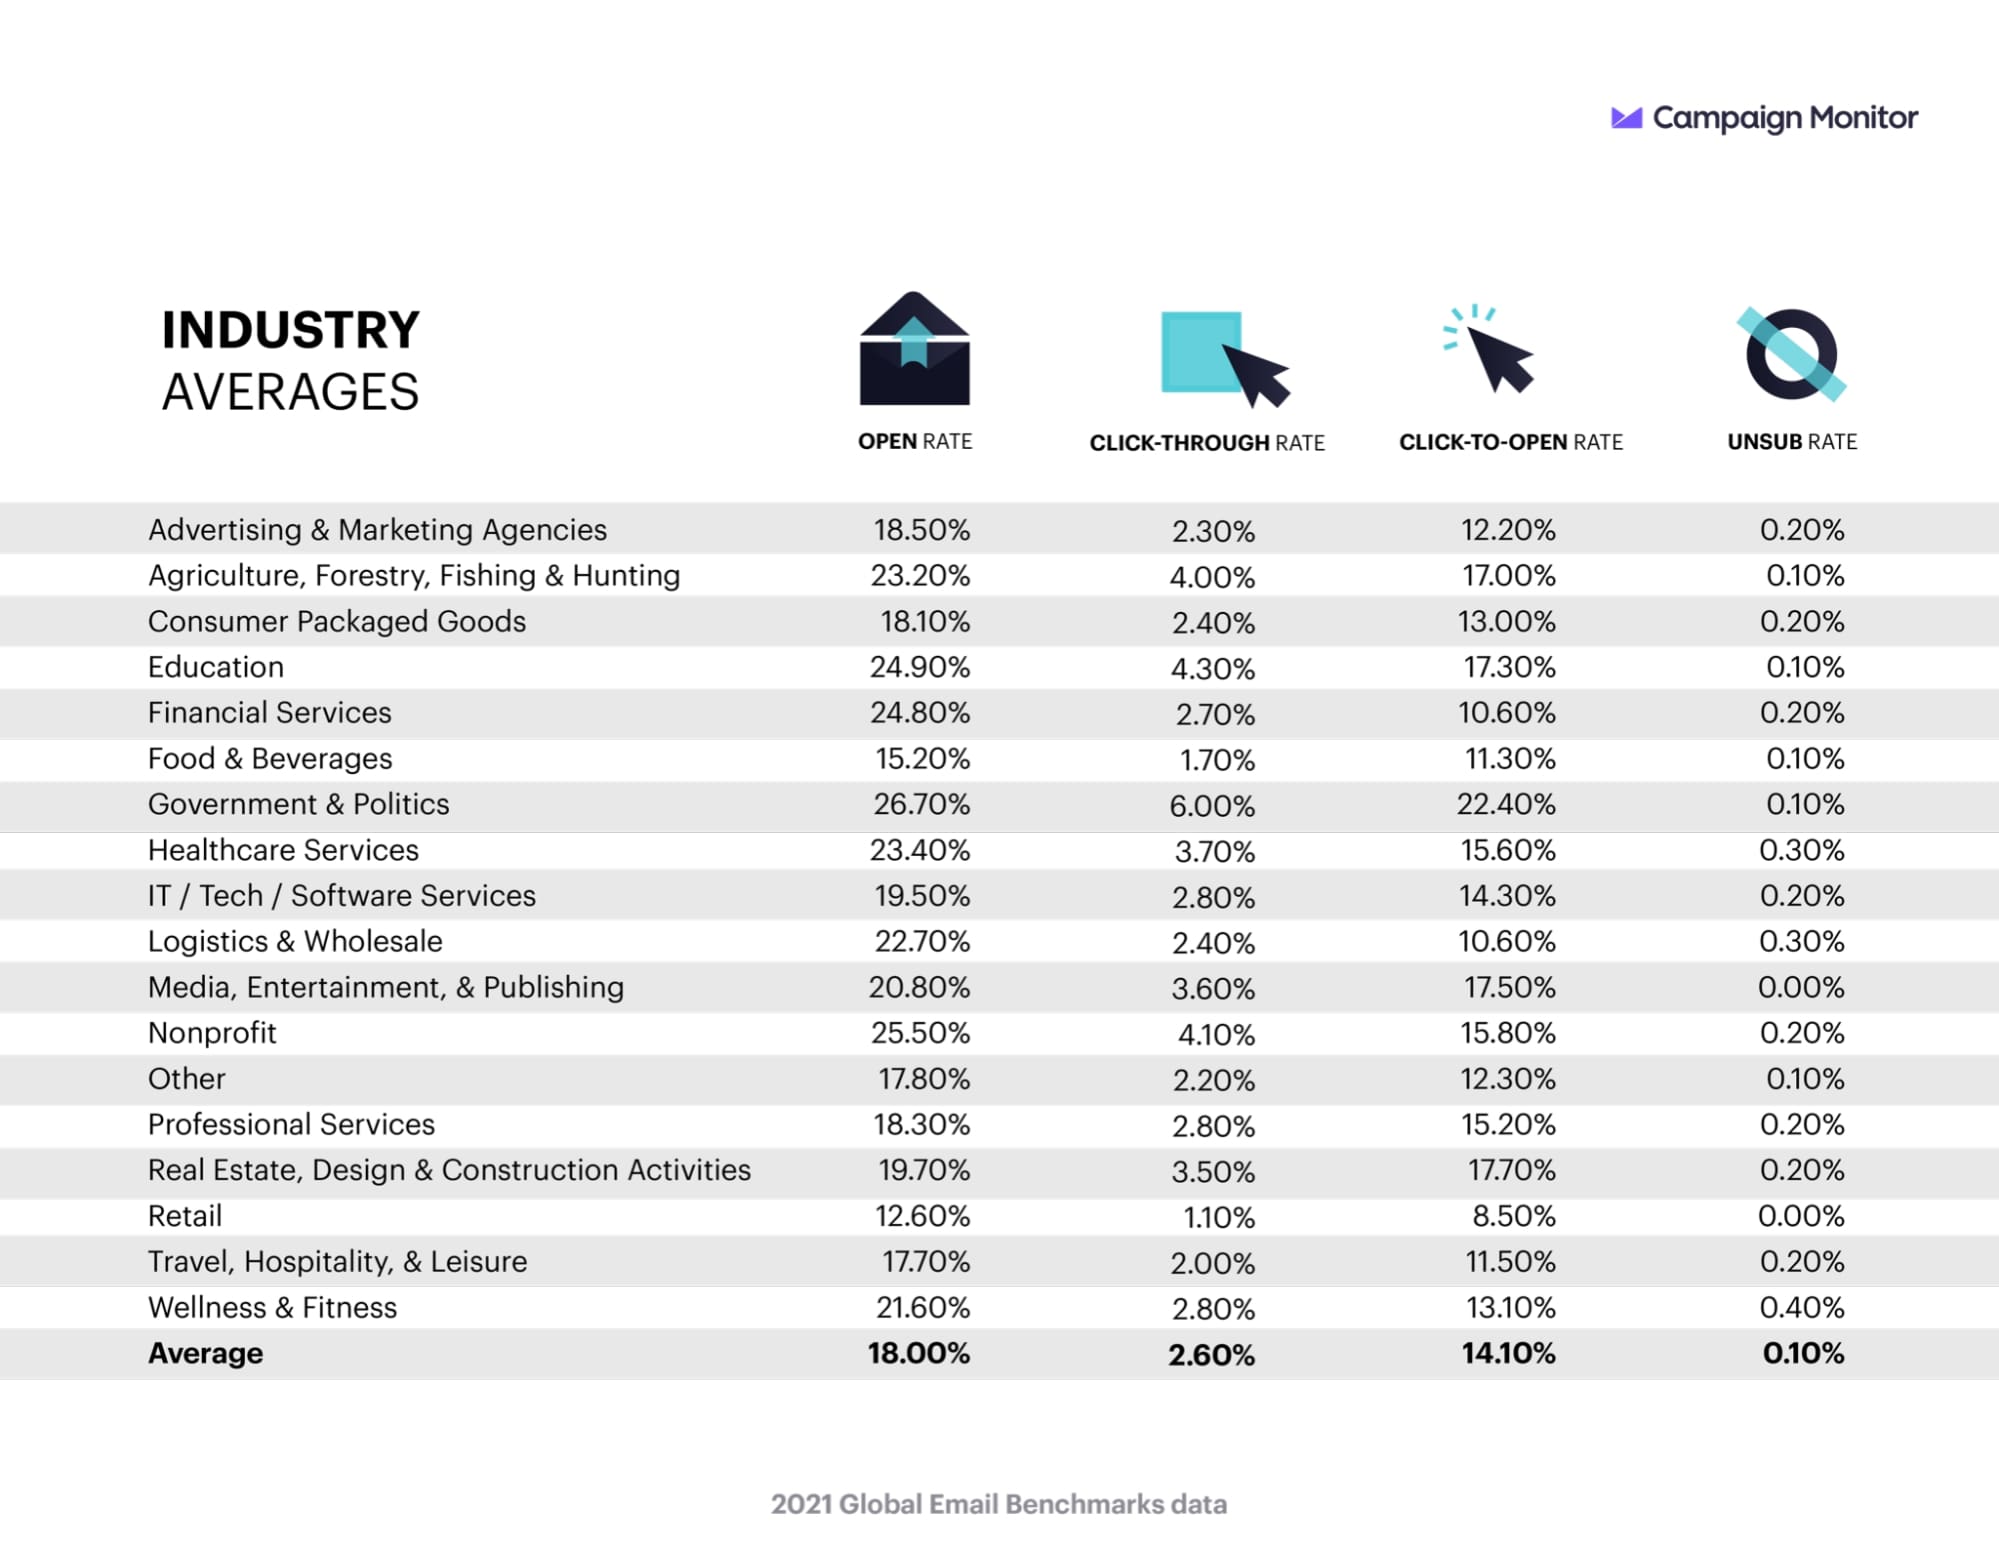 Industry email open rate averages